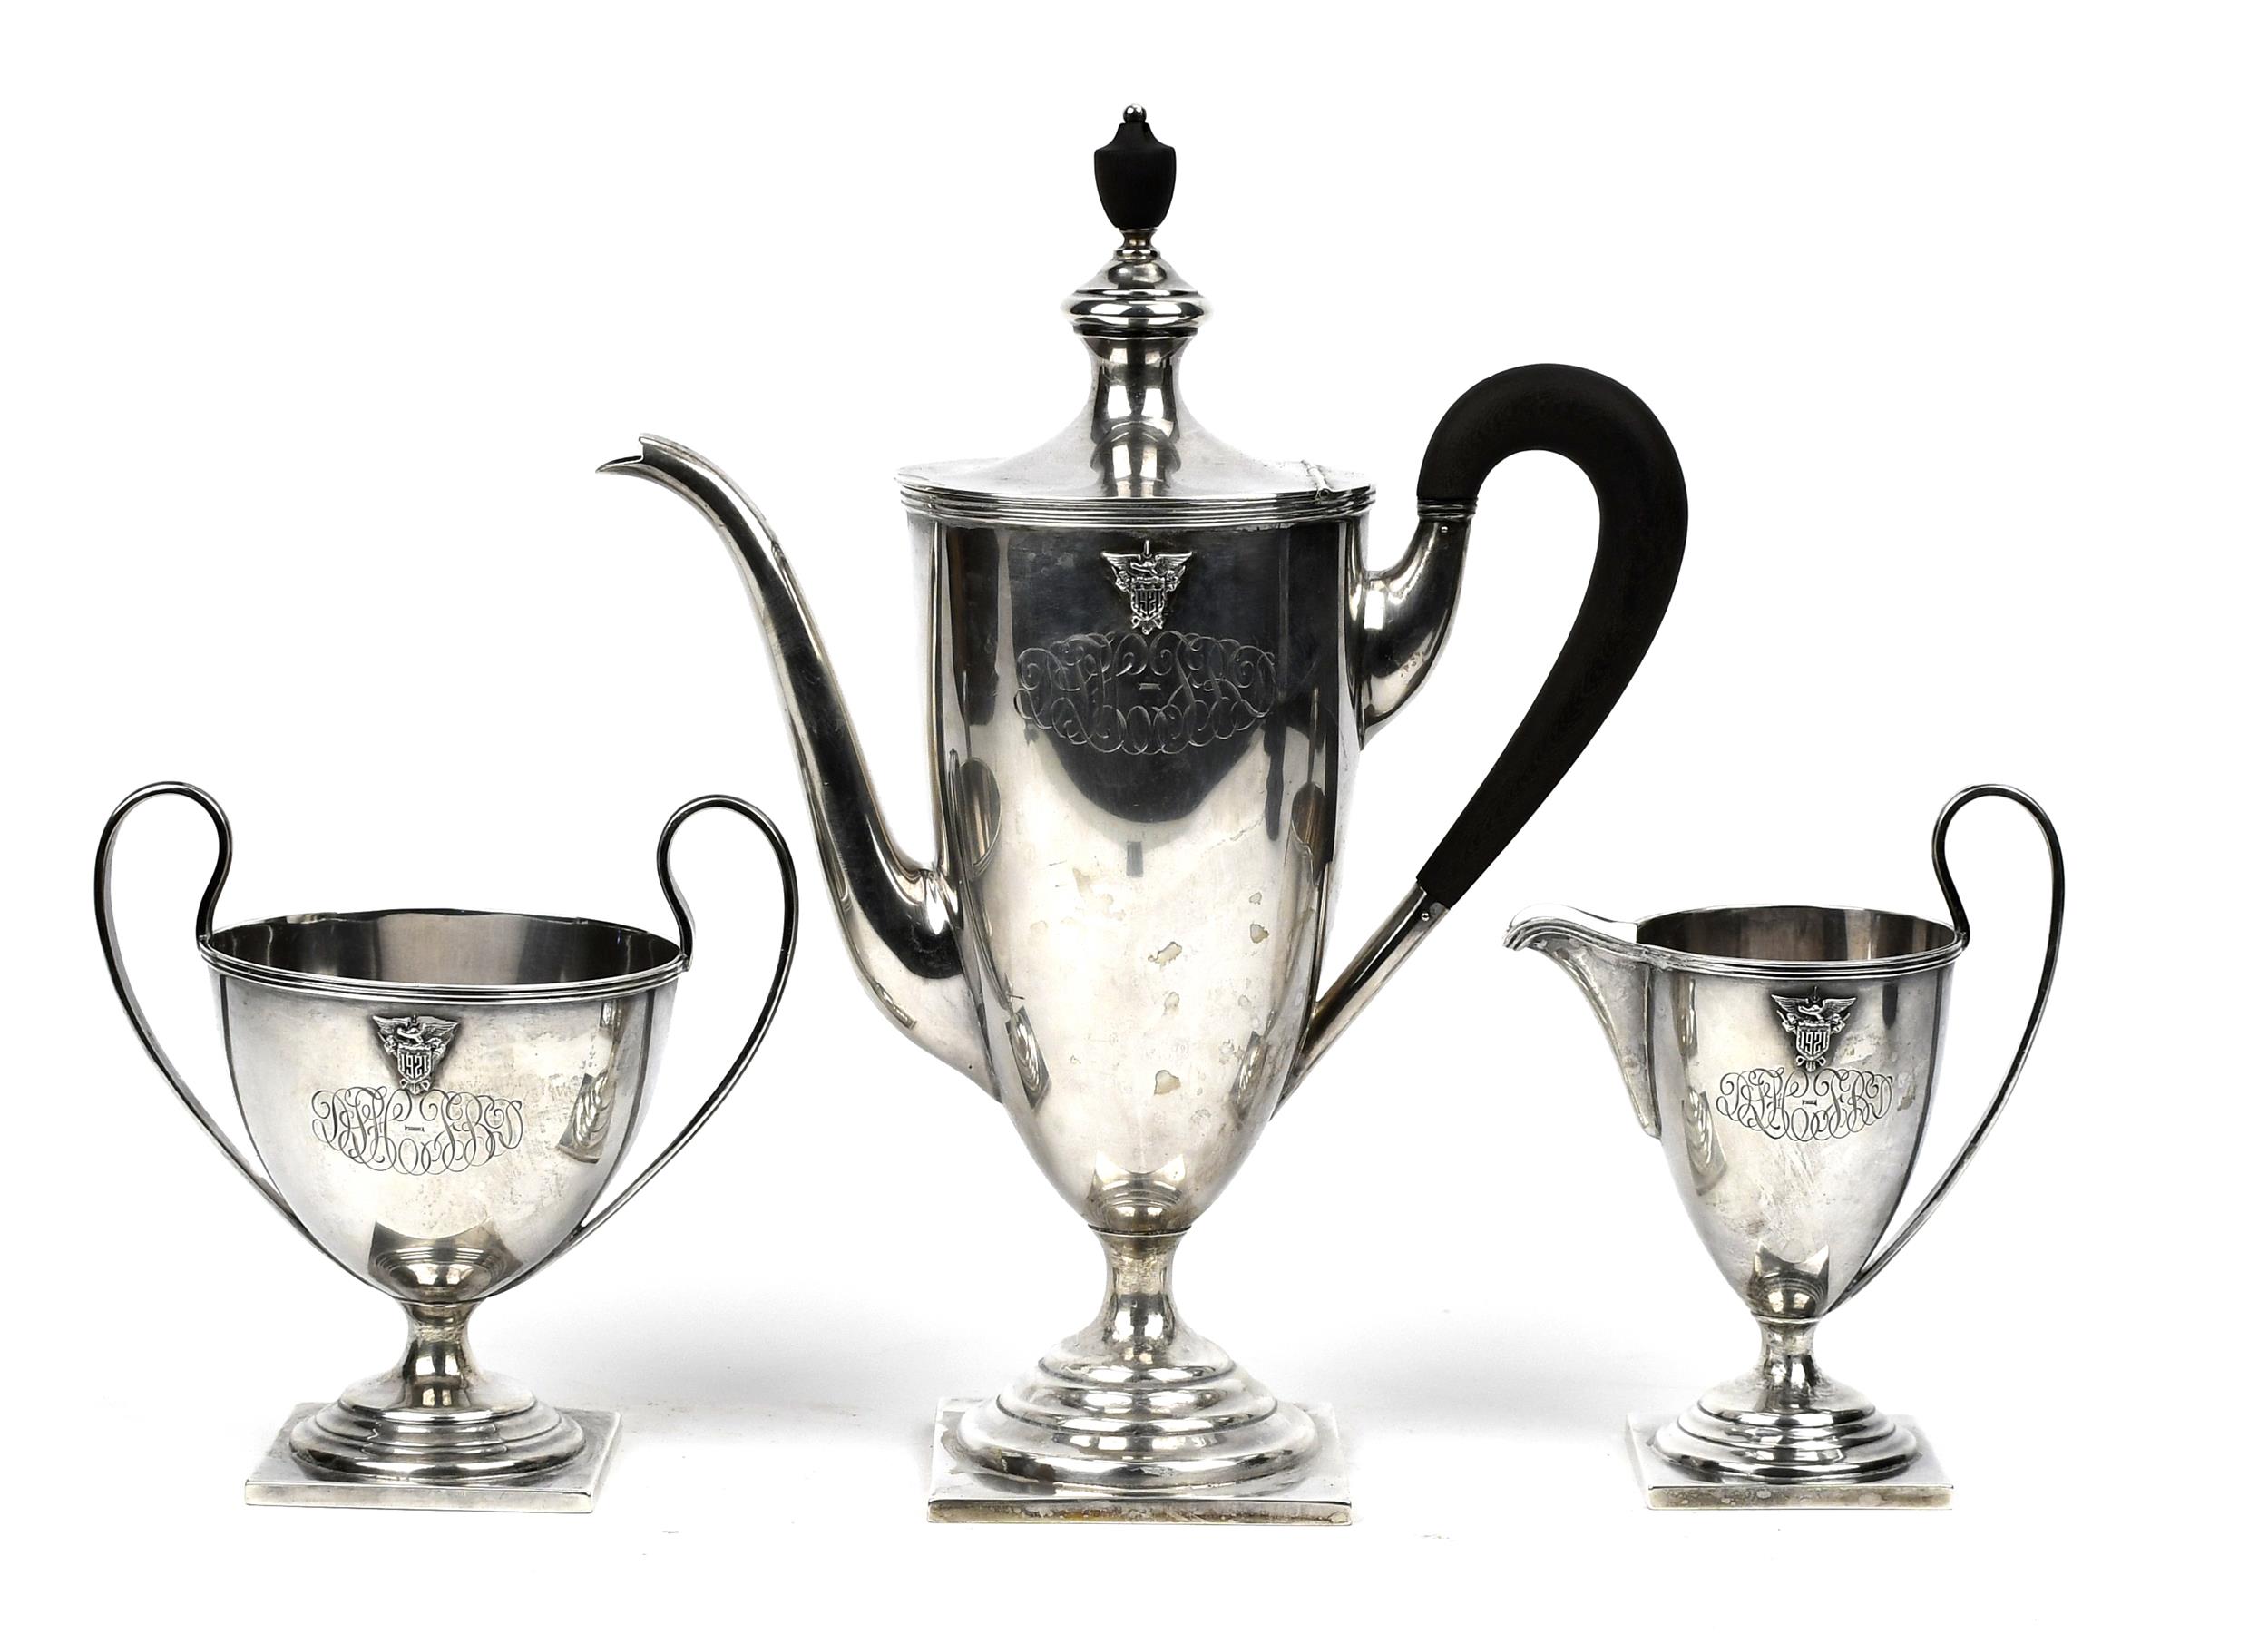 THREE PIECE STERLING TEA SET WITH